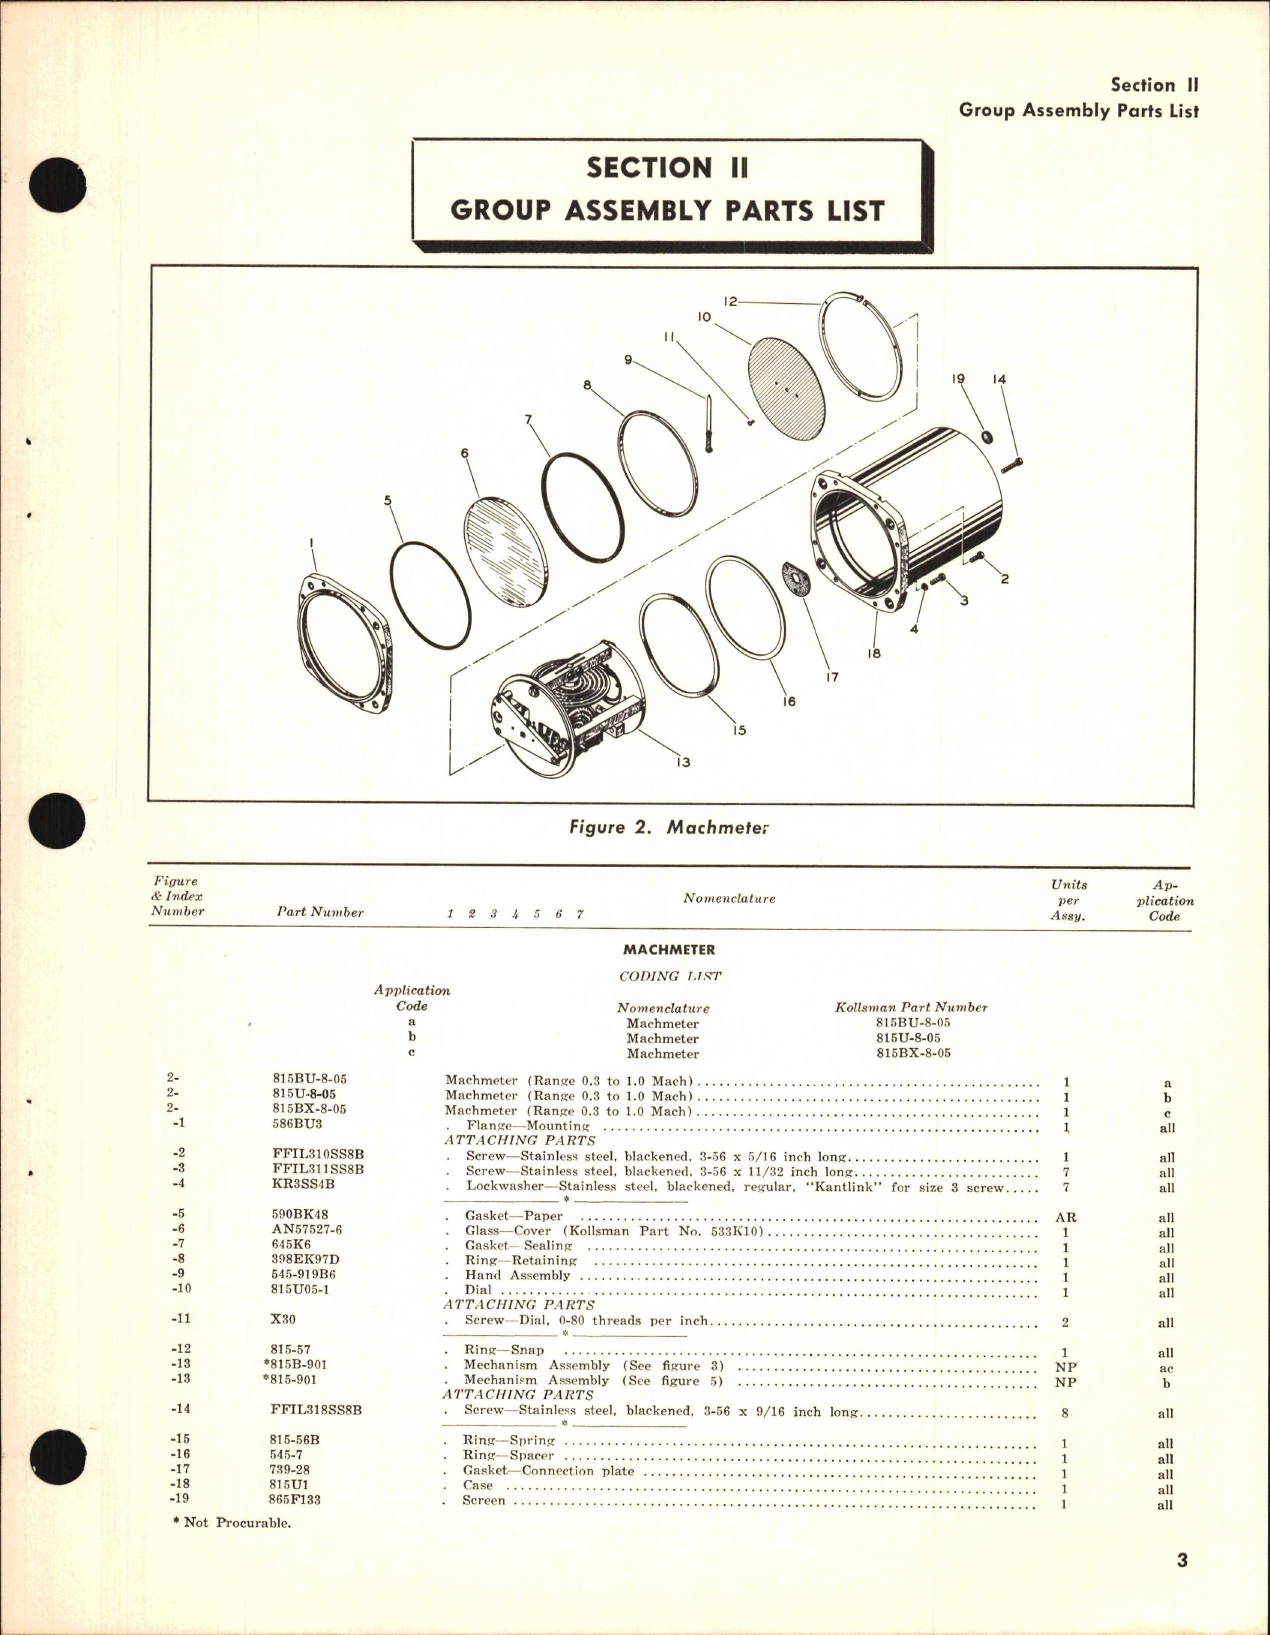 Sample page 5 from AirCorps Library document: Parts Catalog for Kollsman Machmeter